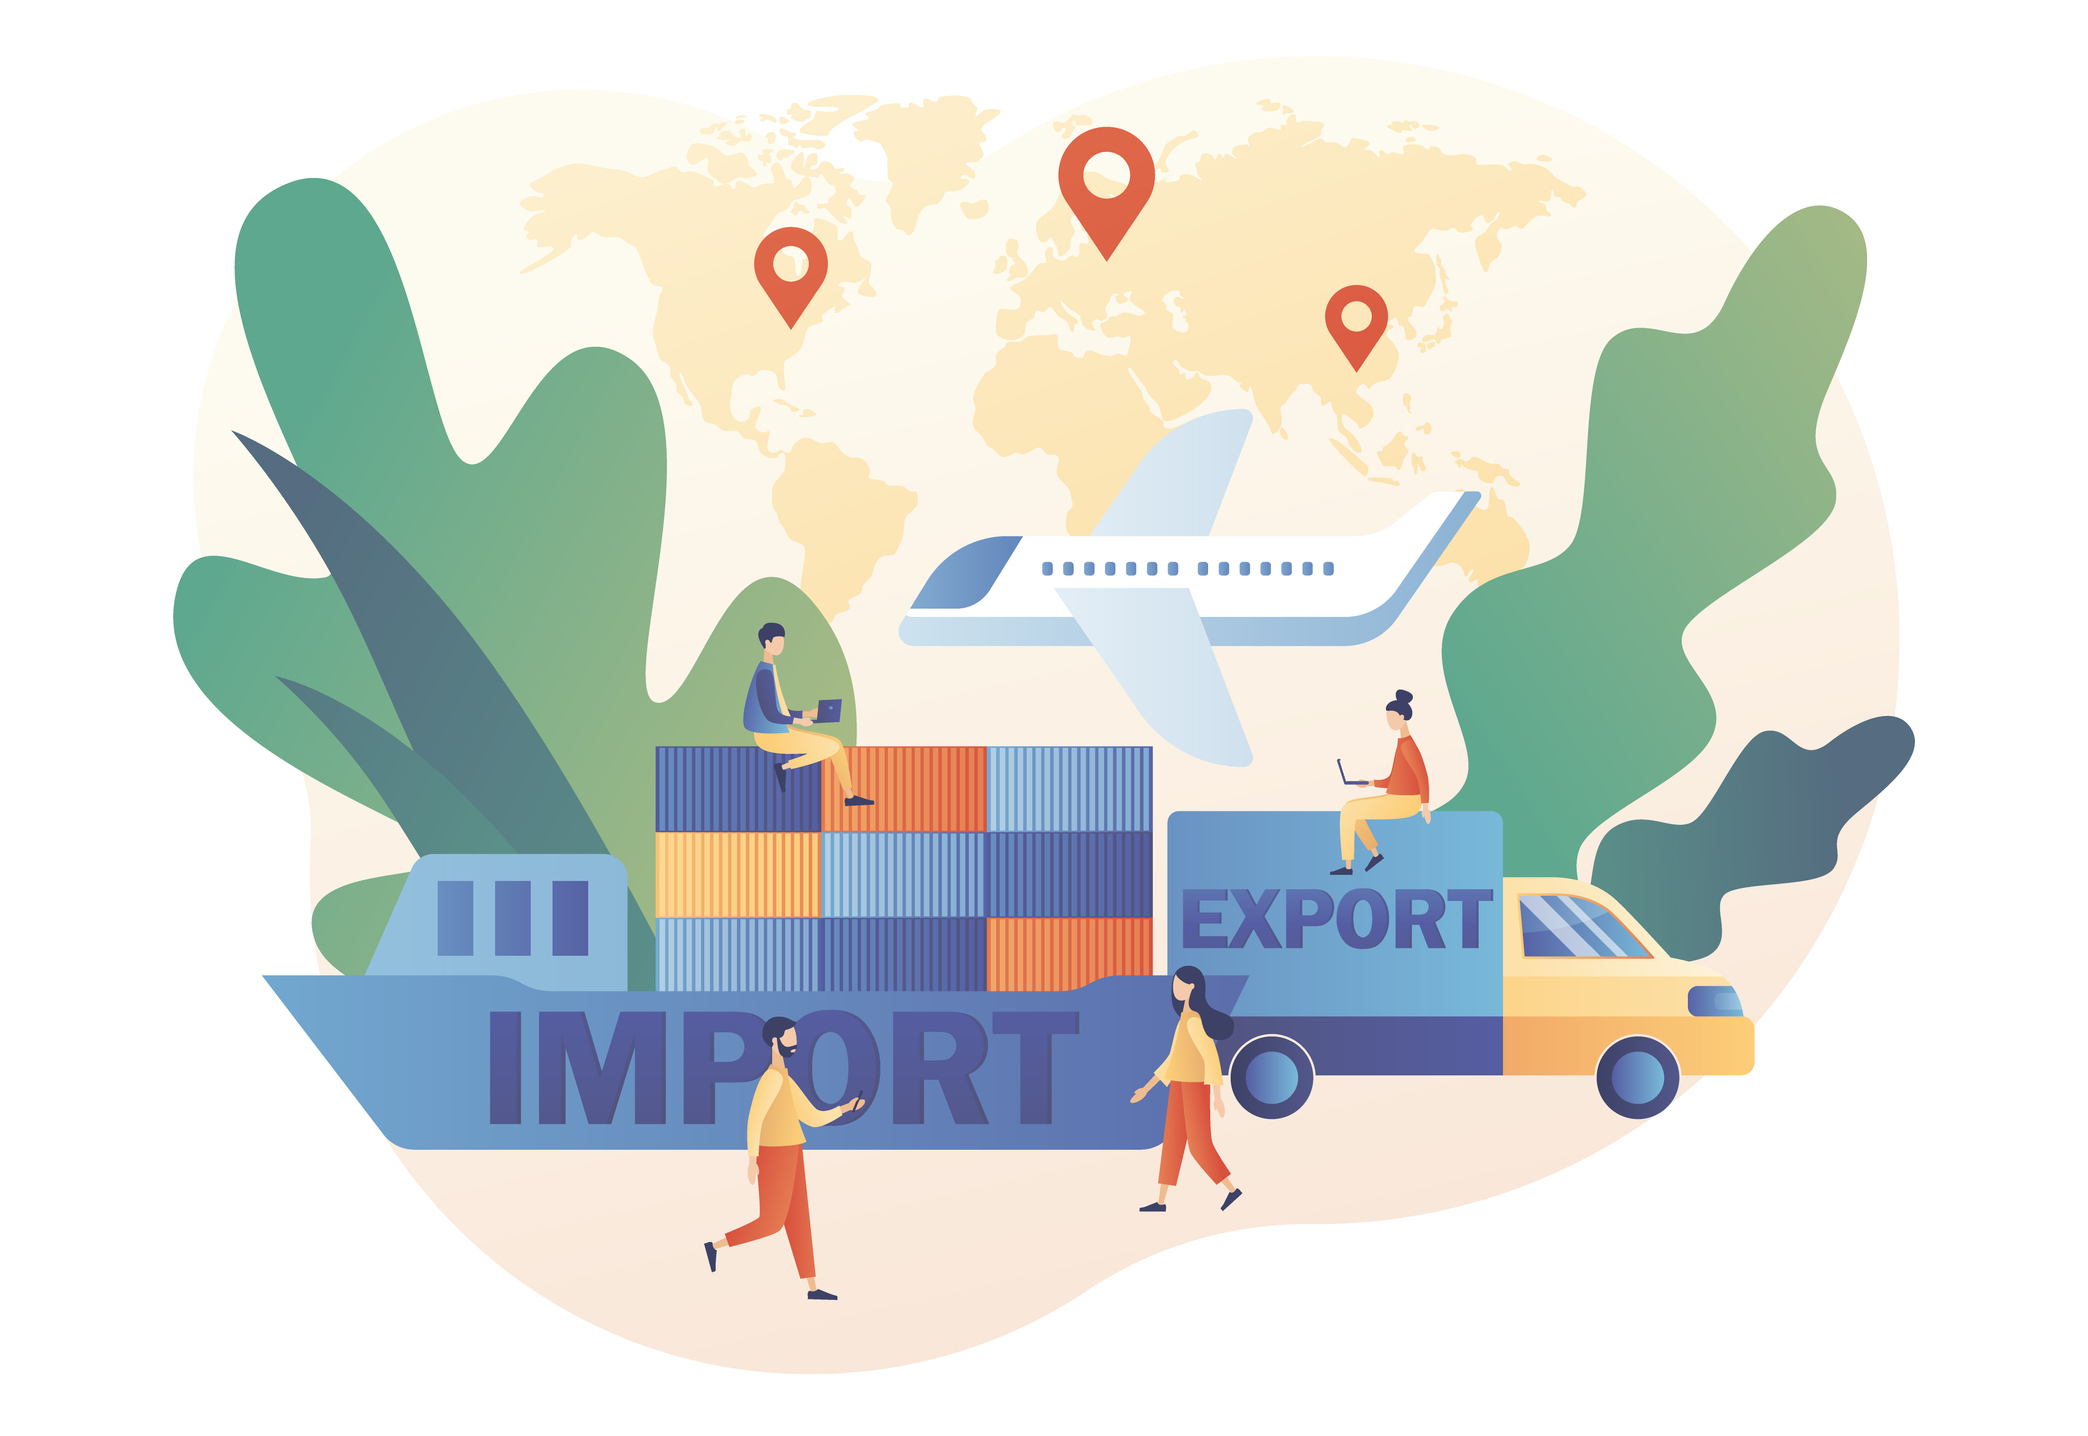 Illustrations of international trade being carried out with green policies.